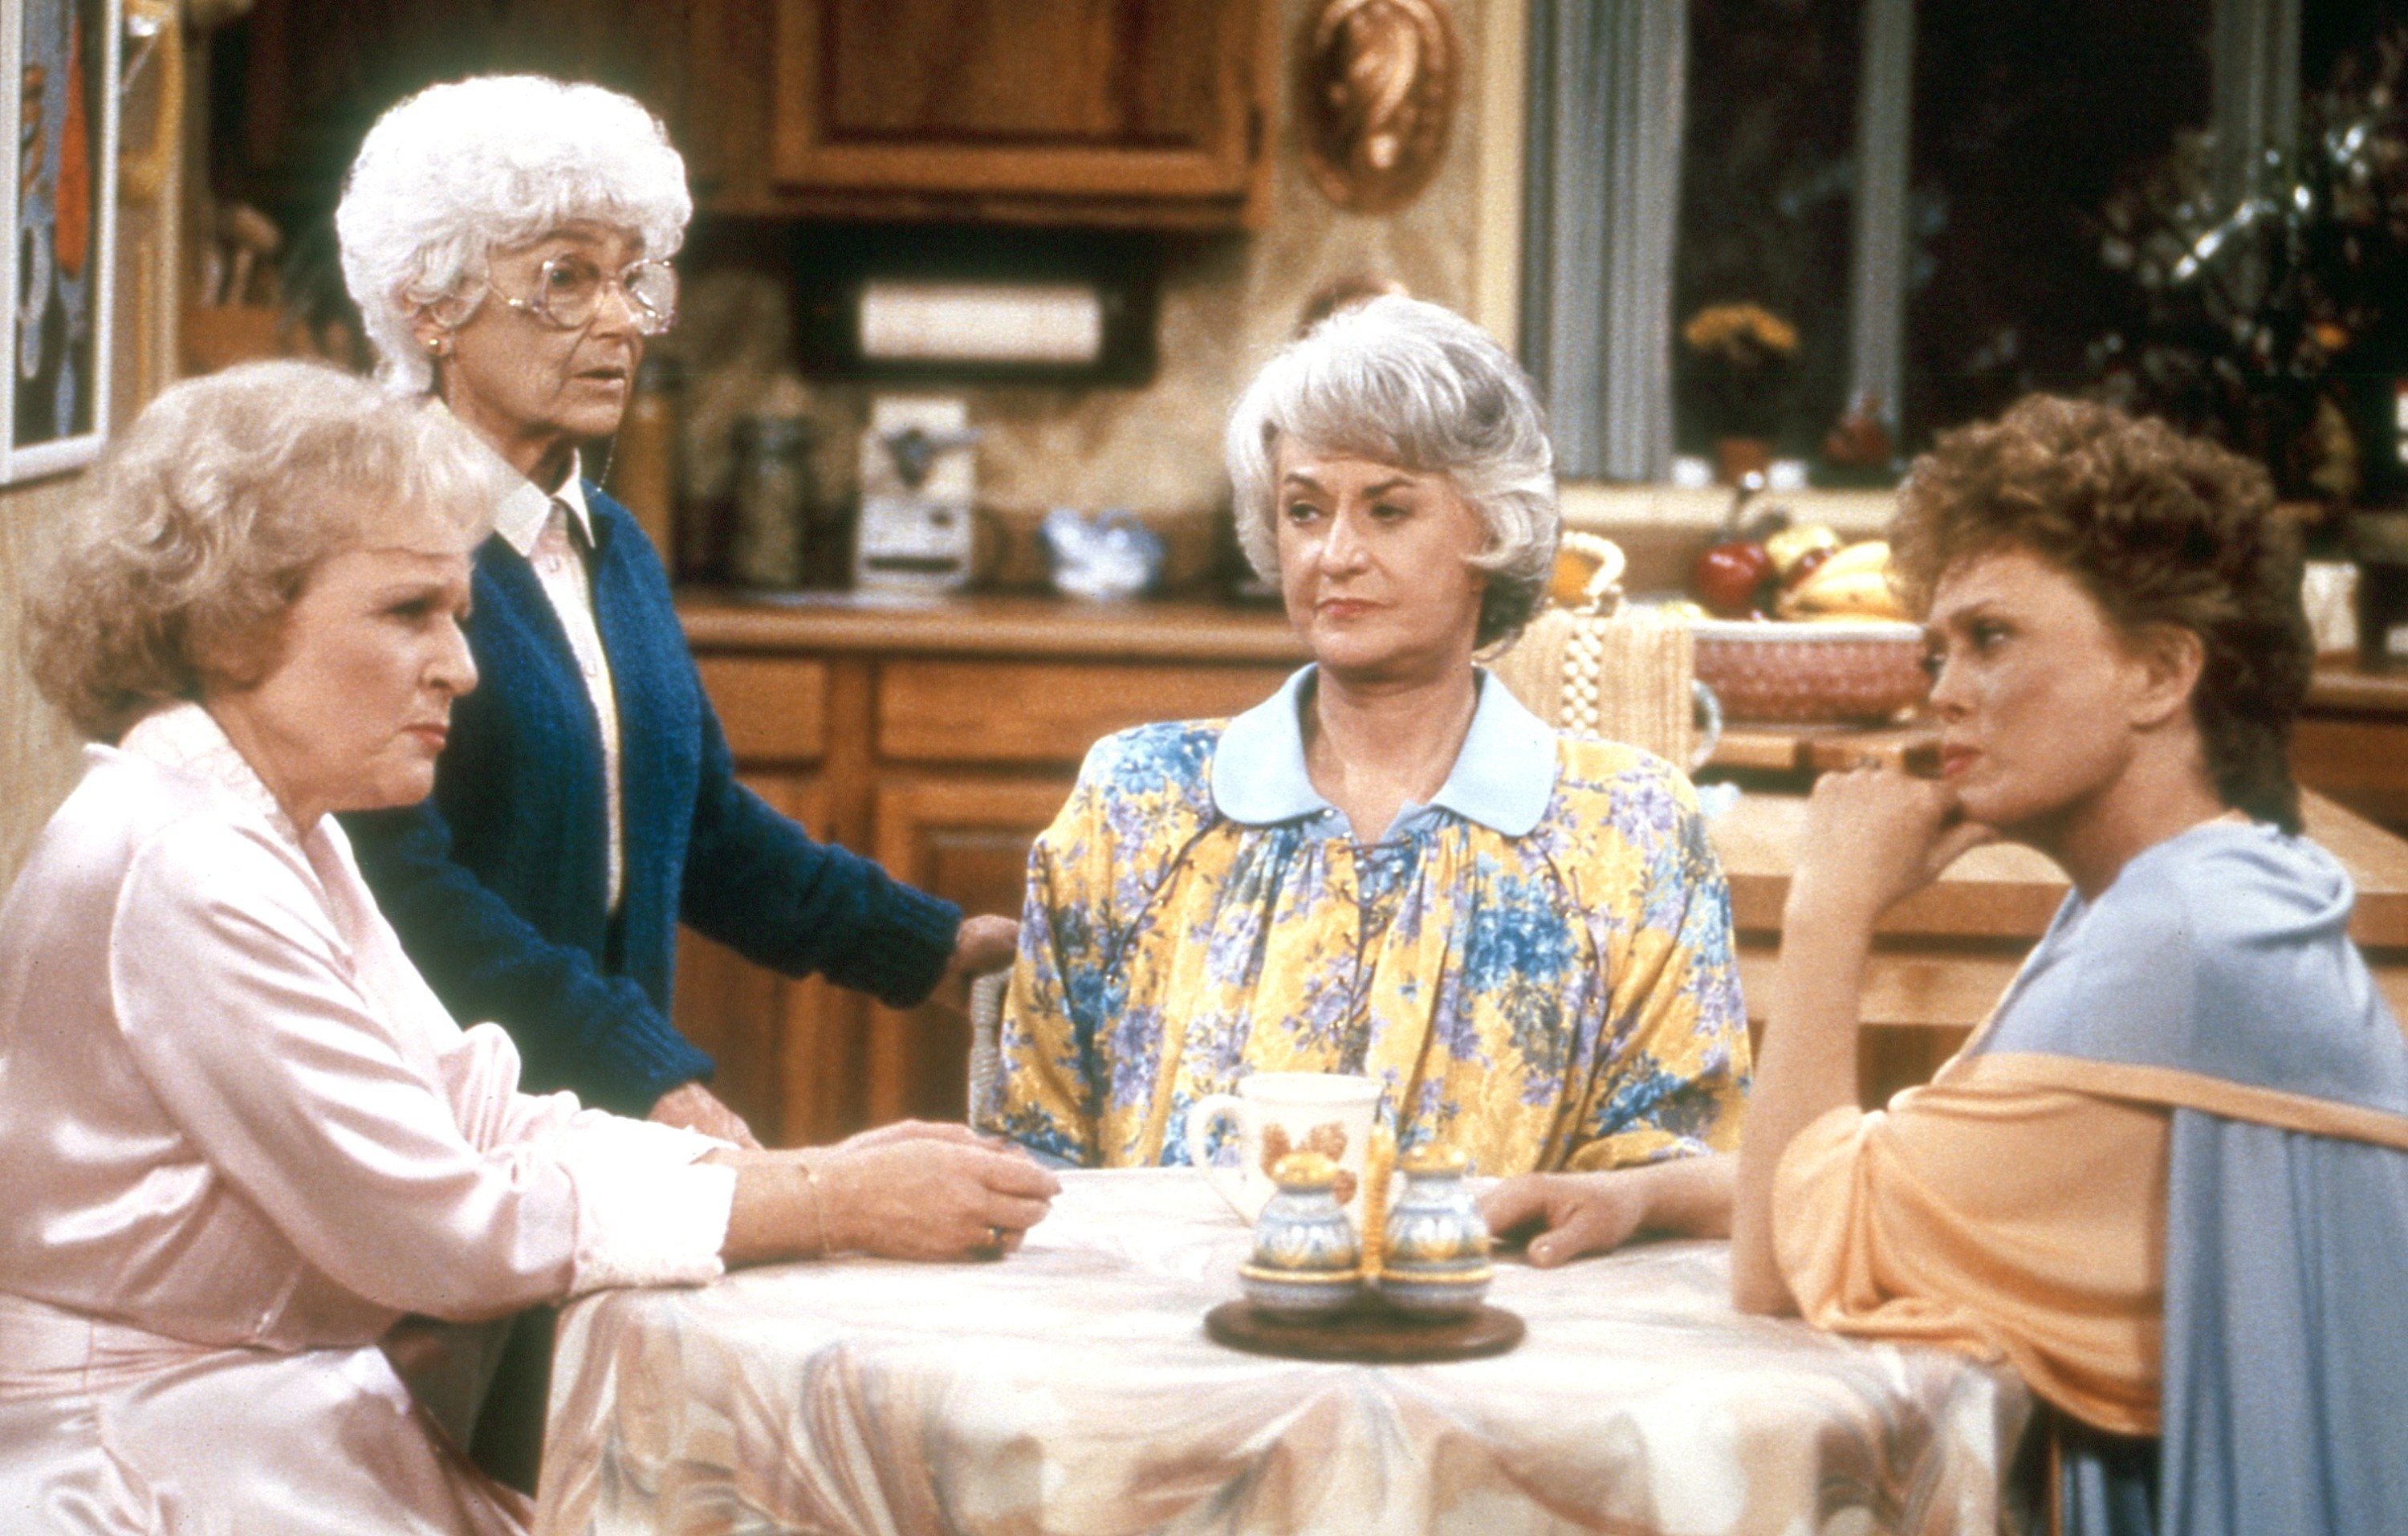 Betty White, Estelle Getty, Bea Arthur, and Rue McClanahan chatting